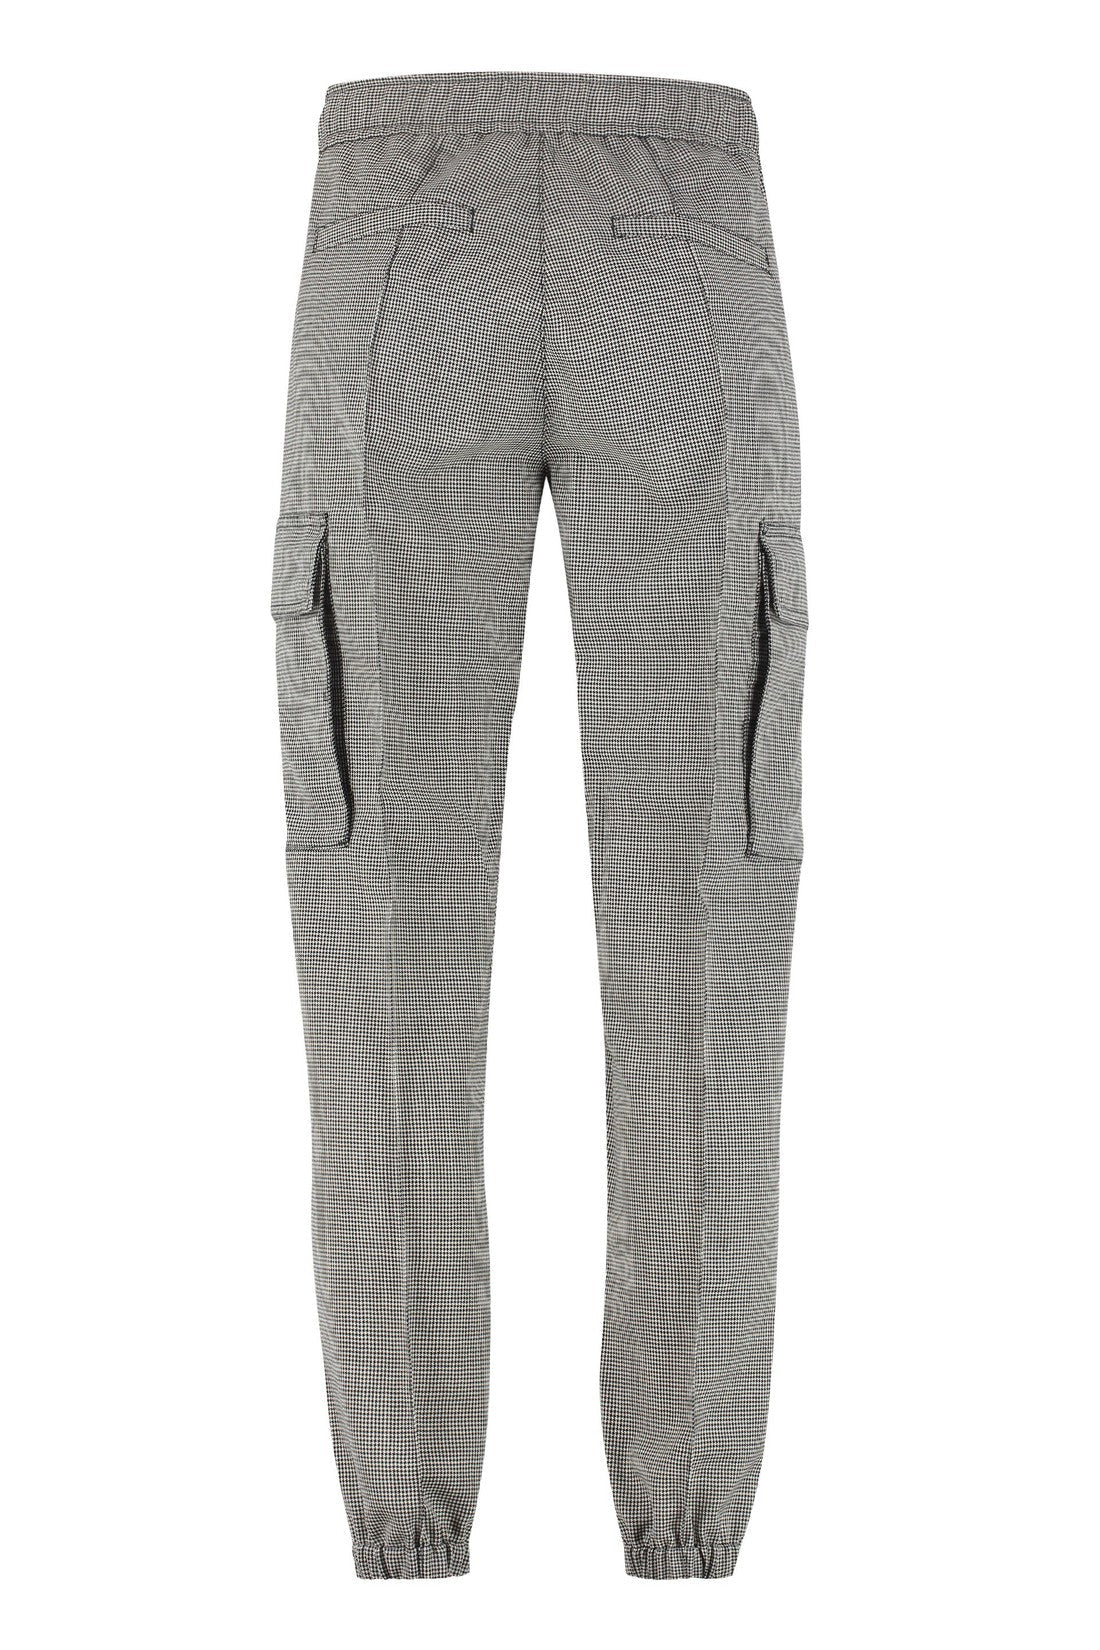 Versace-OUTLET-SALE-Wool cargo trousers-ARCHIVIST